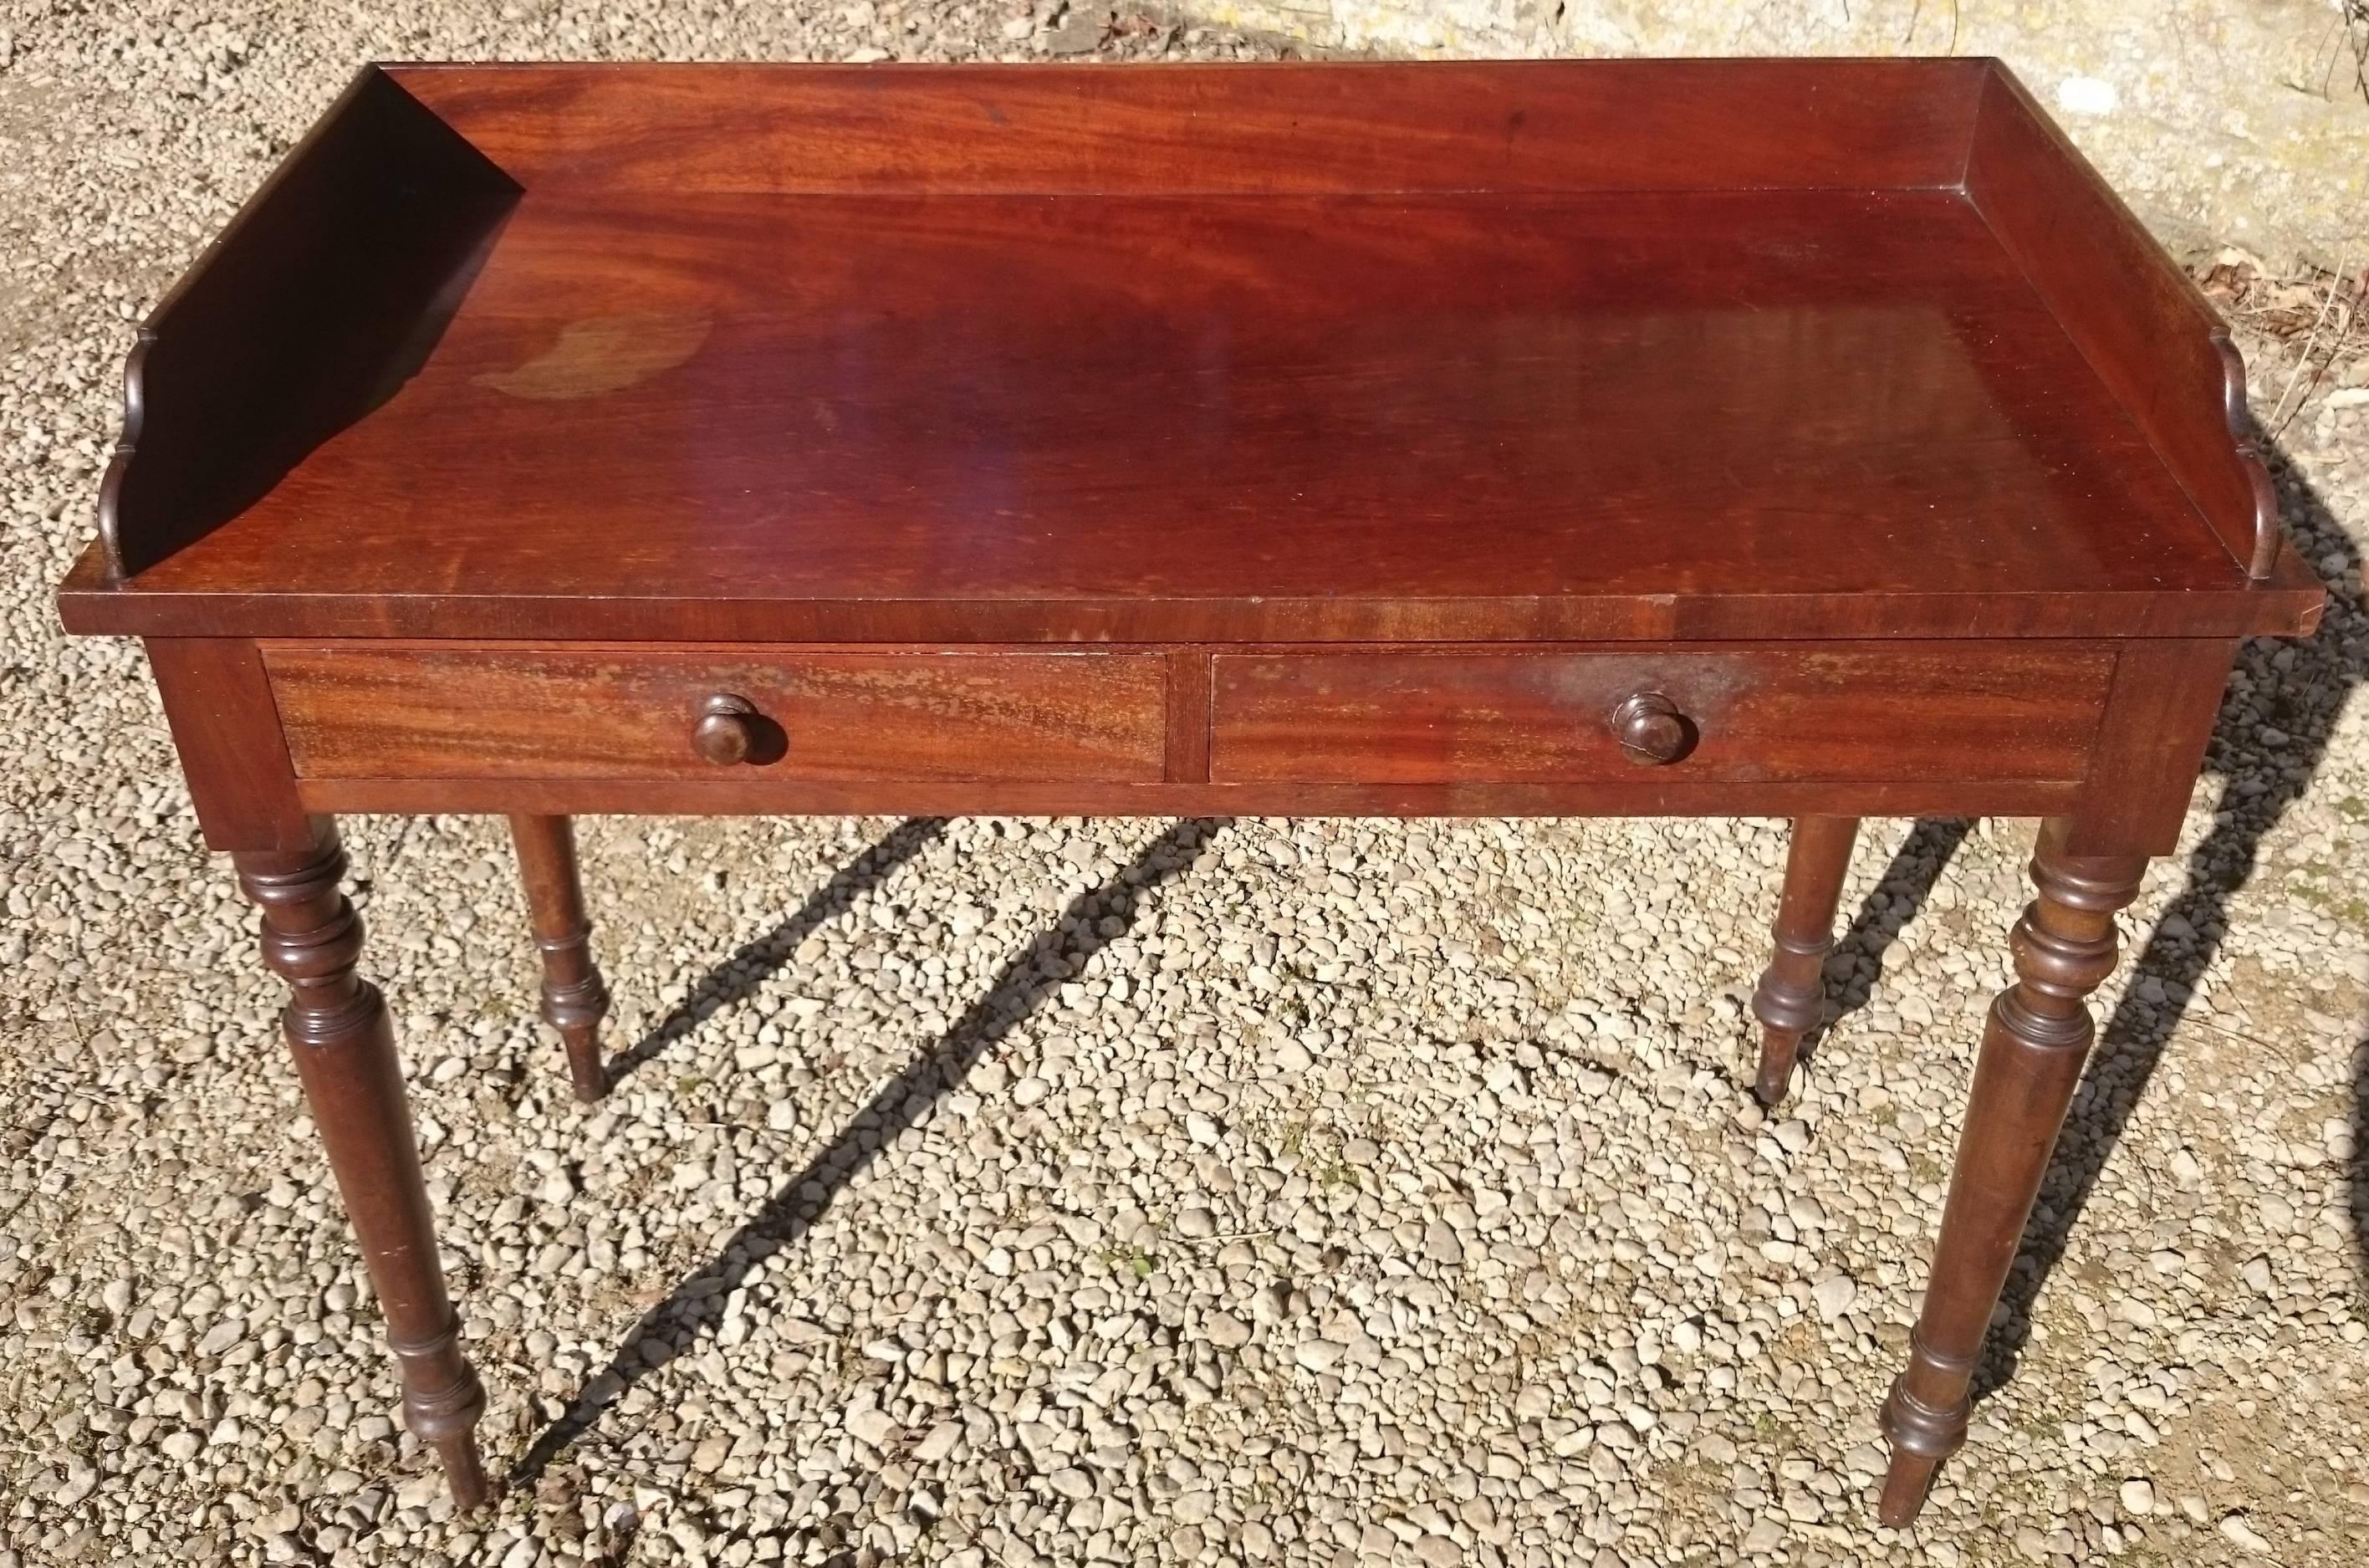 19th century mahogany serving table, side table or dressing table with gallery to stop things falling off the back. This is very useful for all applications, but especially when used as a dressing table as it stops the mirror being pushed too far